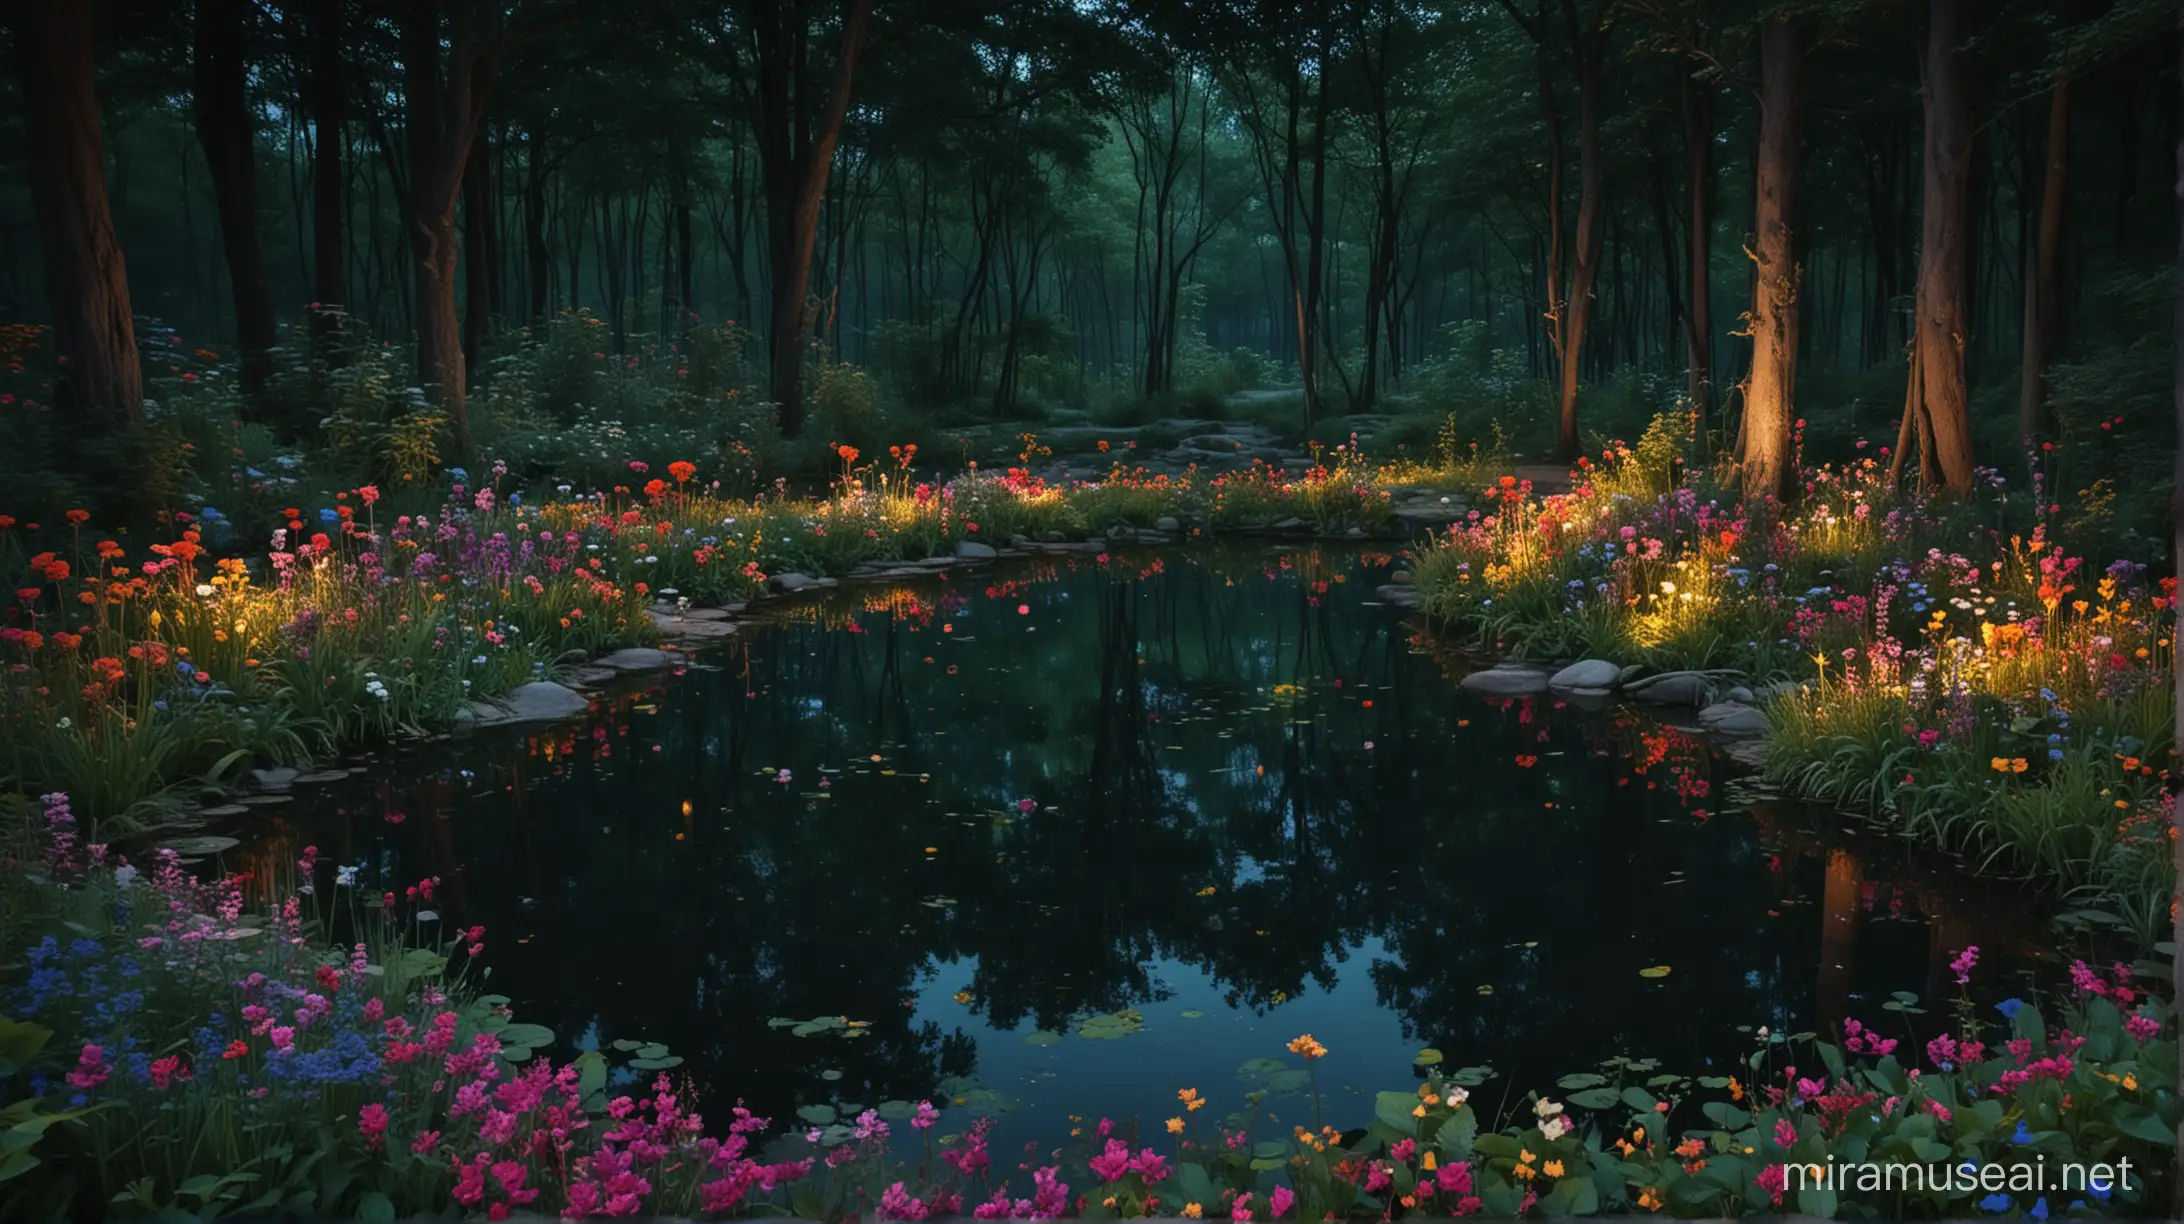 a secret place consisting in a beautiful pond in the middle of a 
forest with old thick trees and colorful flowers, at night